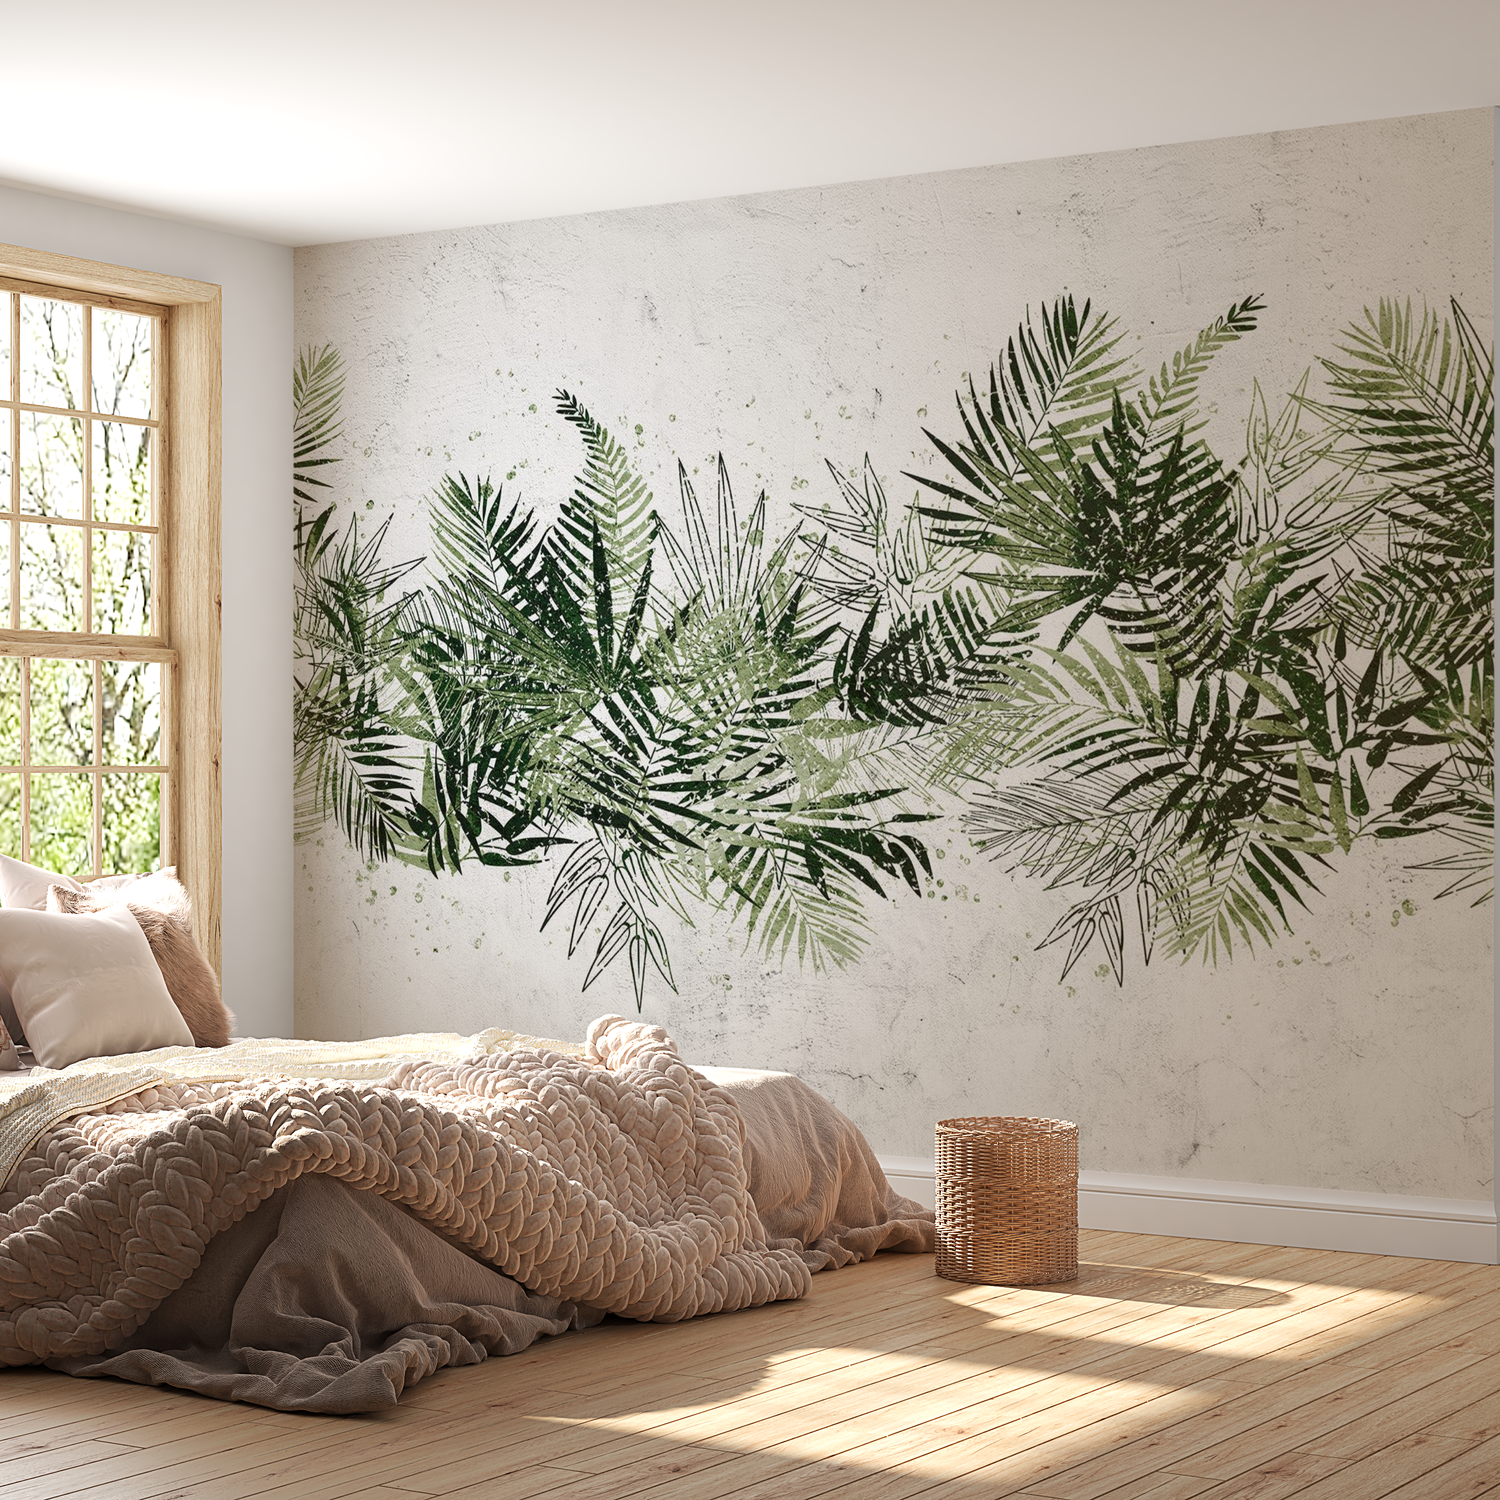 Peel & Stick Botanical Wall Mural - Jungle Tropical Leaves - Removable Wallpaper 38"Wx27"H